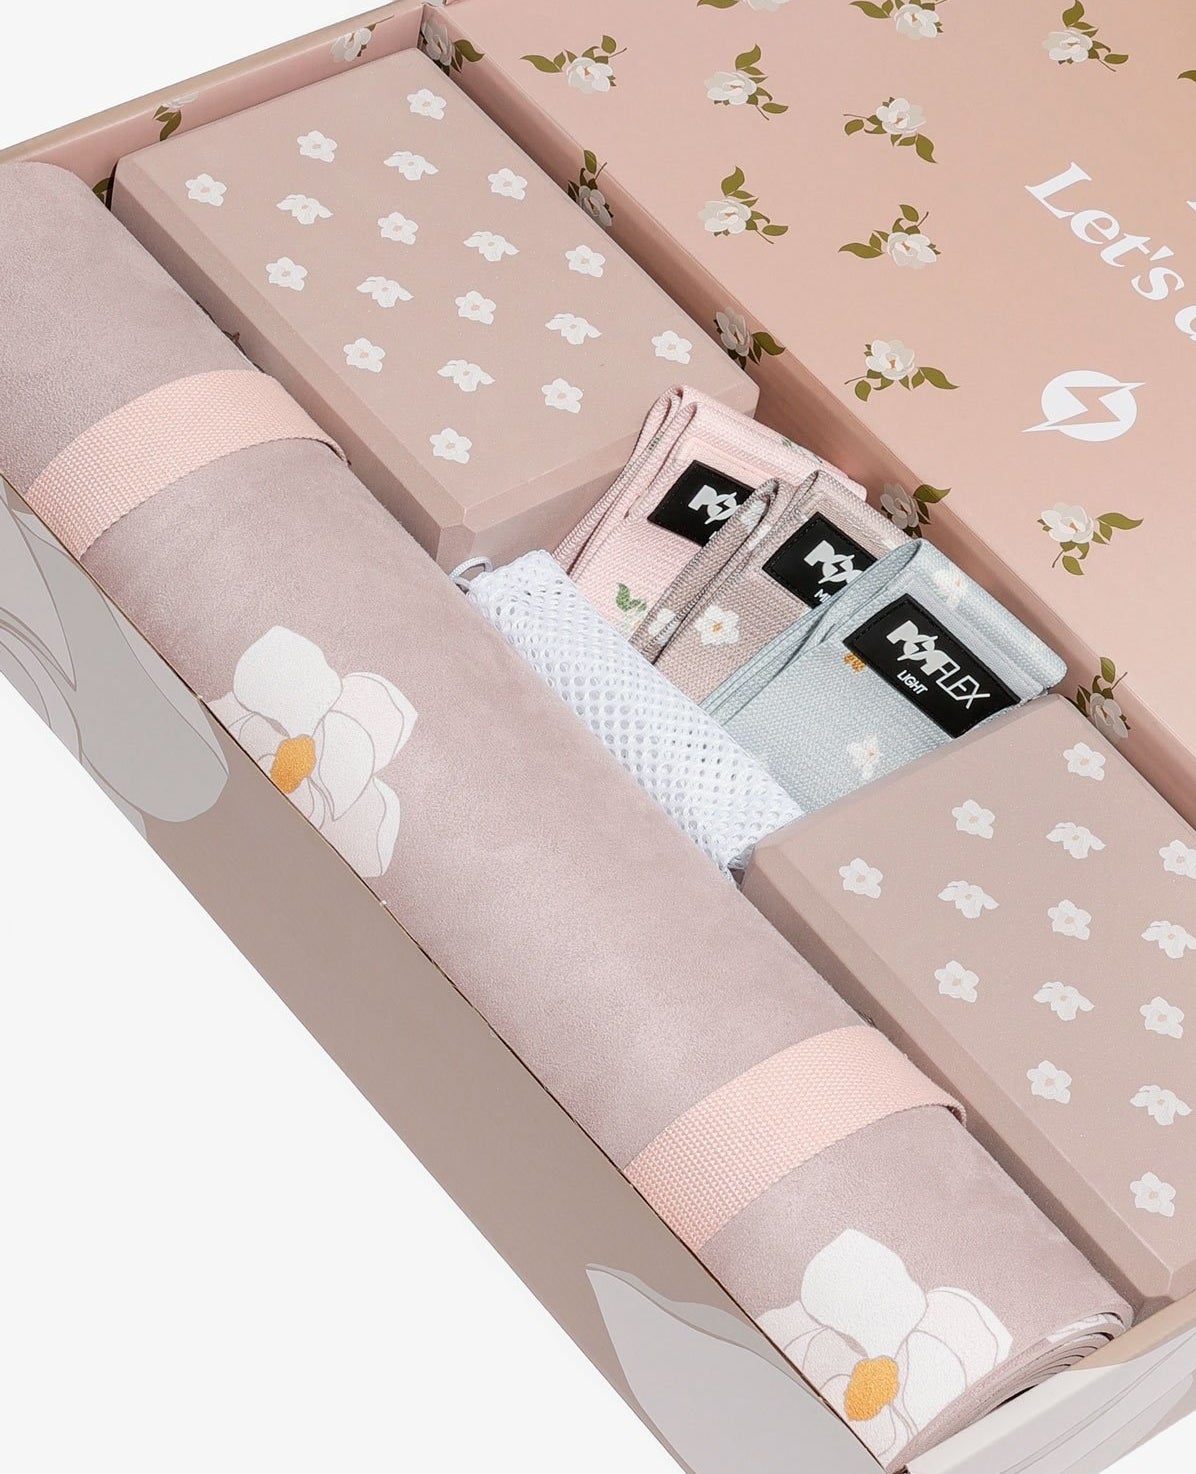 A pale pink box with a yoga mat, two yoga blocks, three bands, and a mesh bag, that all have magnolia flower graphics throughout